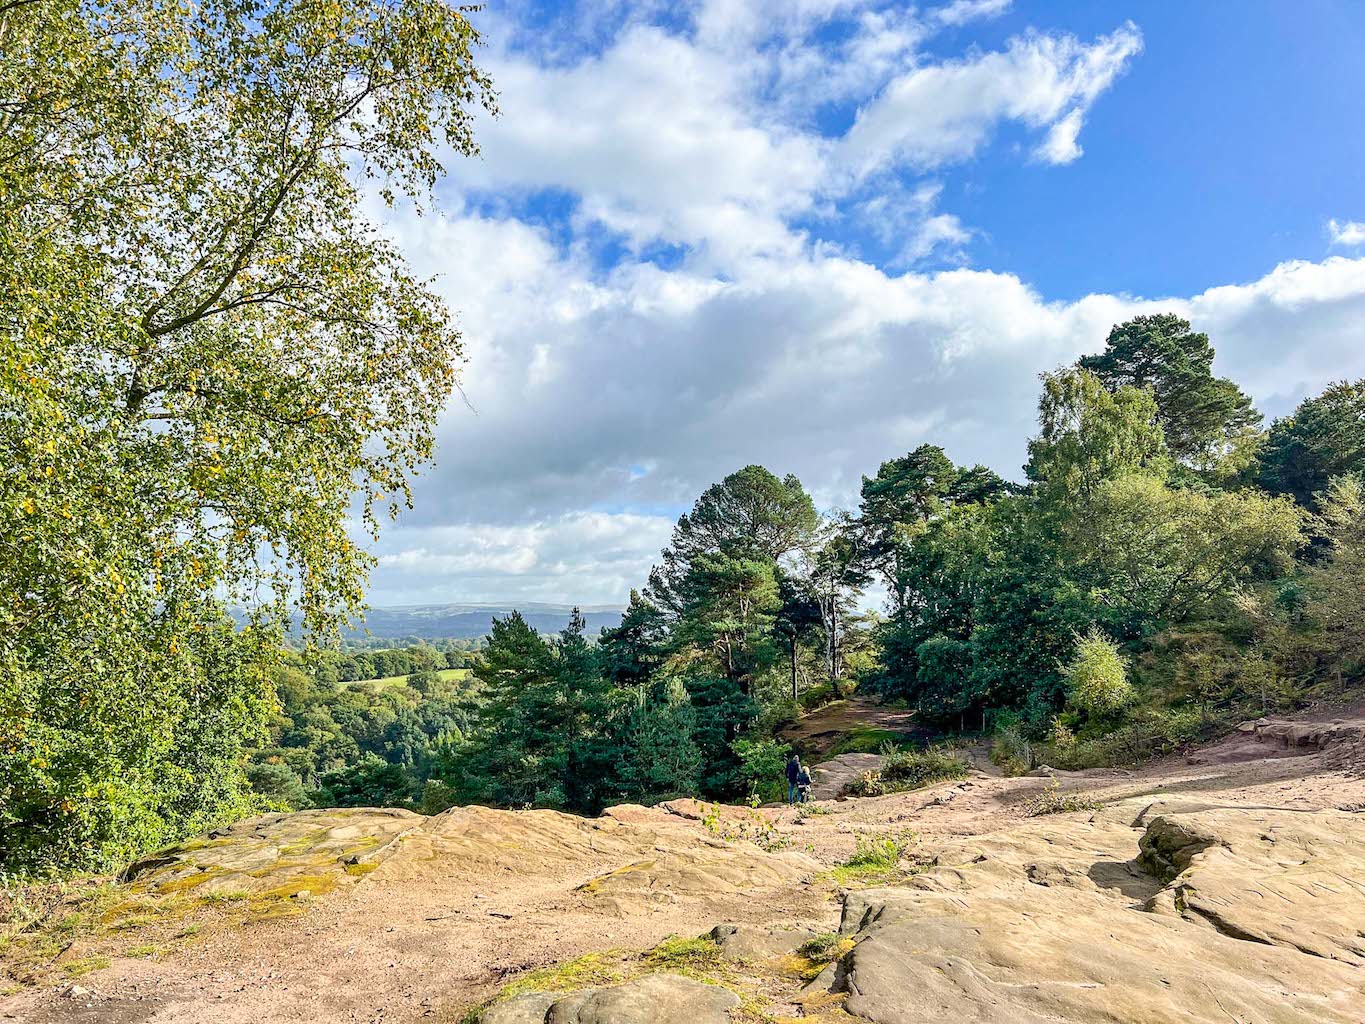 Things to do near Manchester Airport, Alderley Edge woodland